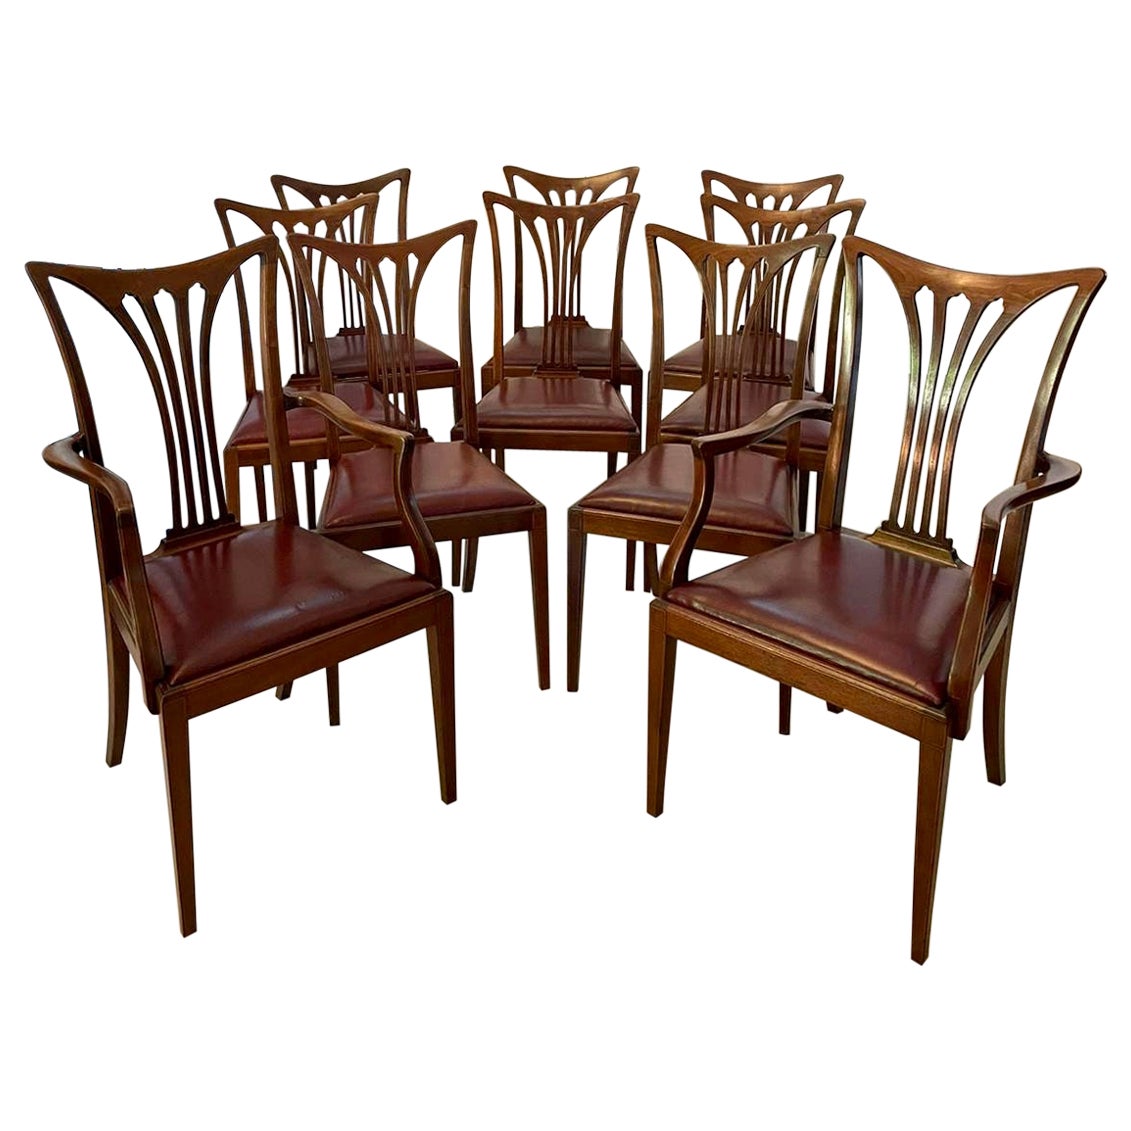 Set of 10 Antique Victorian Quality Mahogany Inlaid Dining Chairs